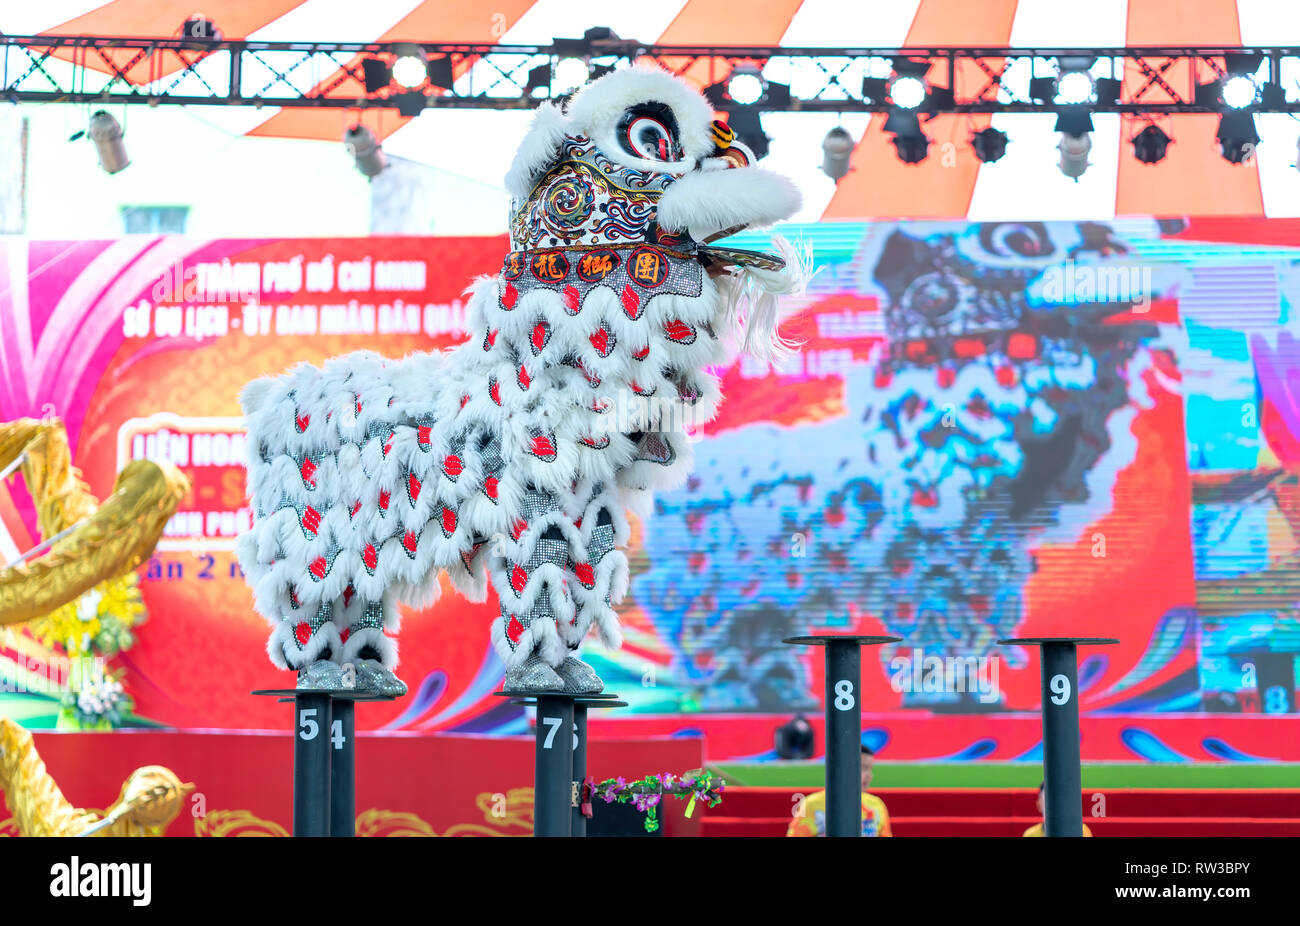 Practitioners in costume lion dancing perform on stage in Van Lang Park, District 5, to pray, safety and luck in new year attract visitors to see Stock Photo